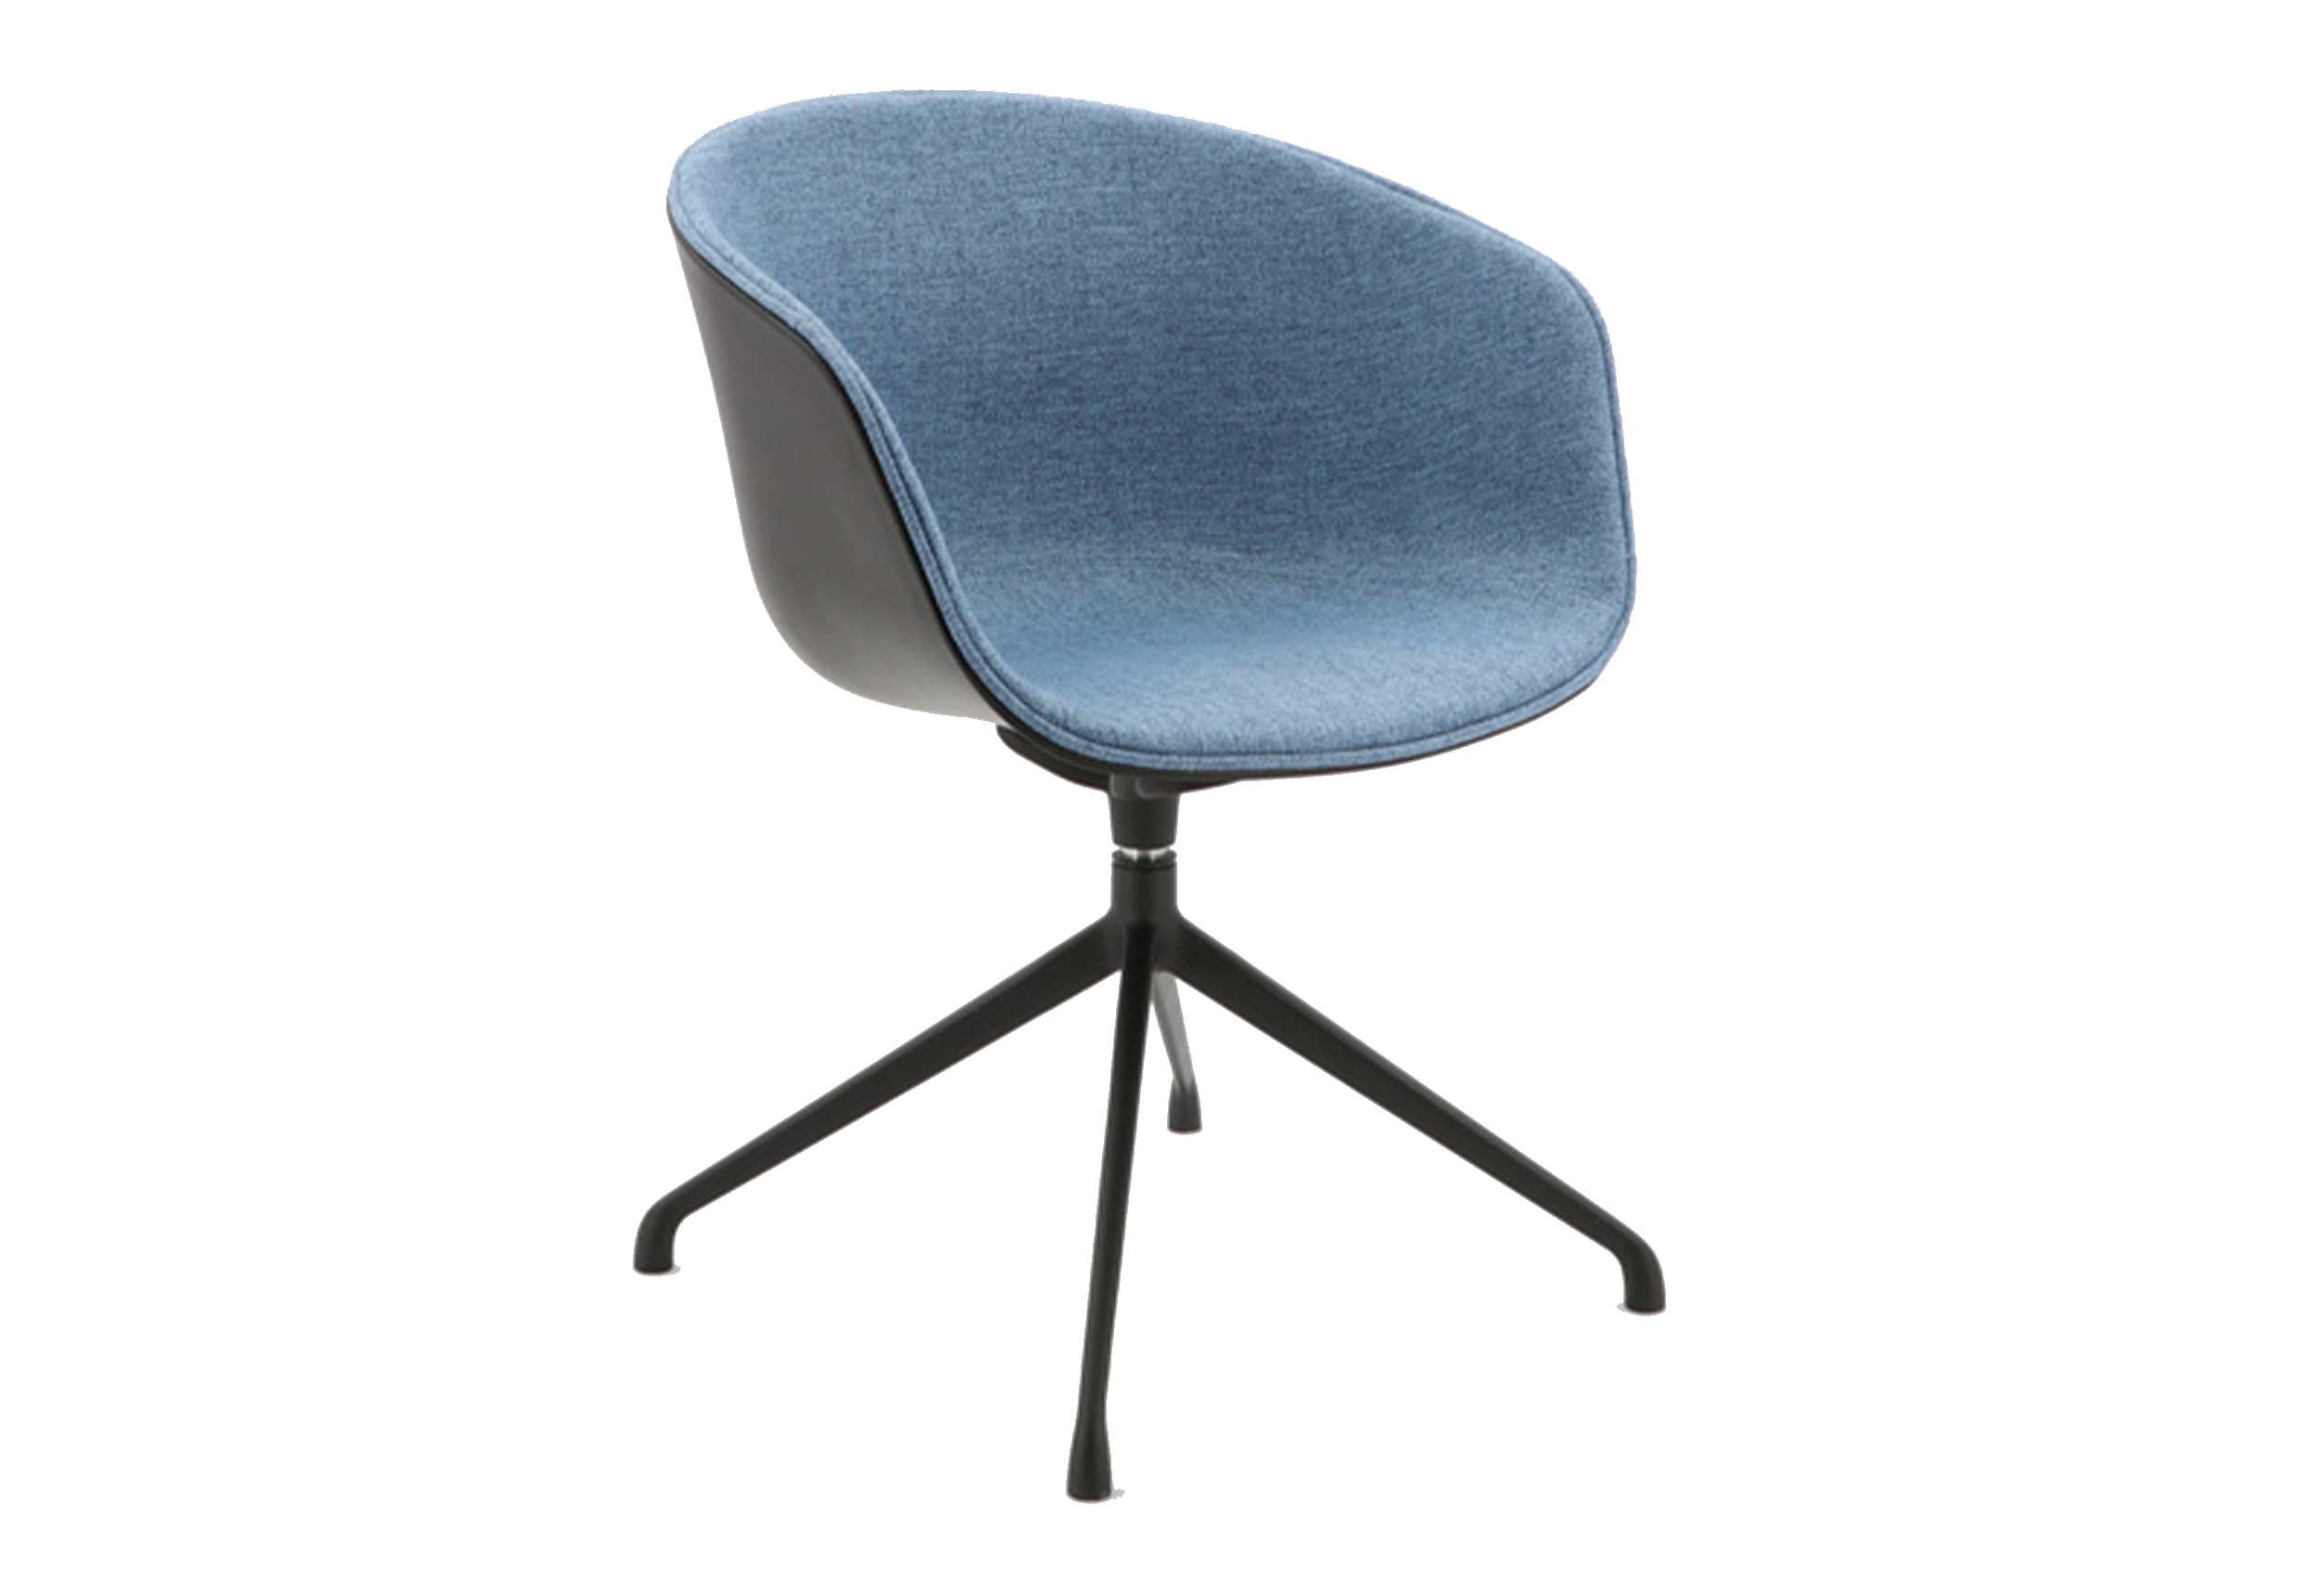 Fabric Seat Plastic Chair With Black Coated Four Fixed Legs (DU-0841C)